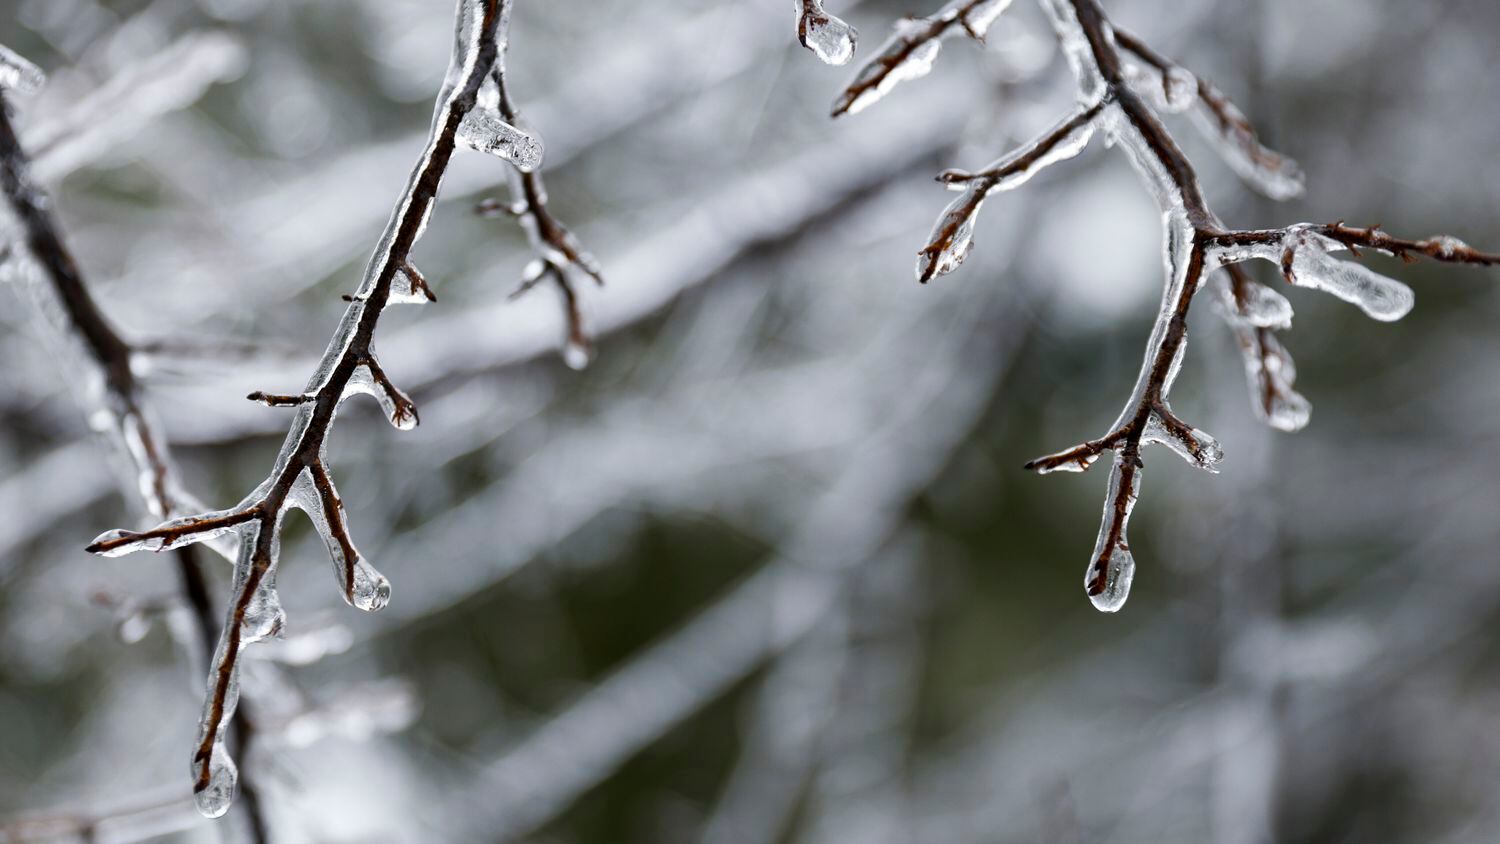 Ice covers branches of trees near White Rock Lake in Dallas, Thursday, Feb. 2, 2023.